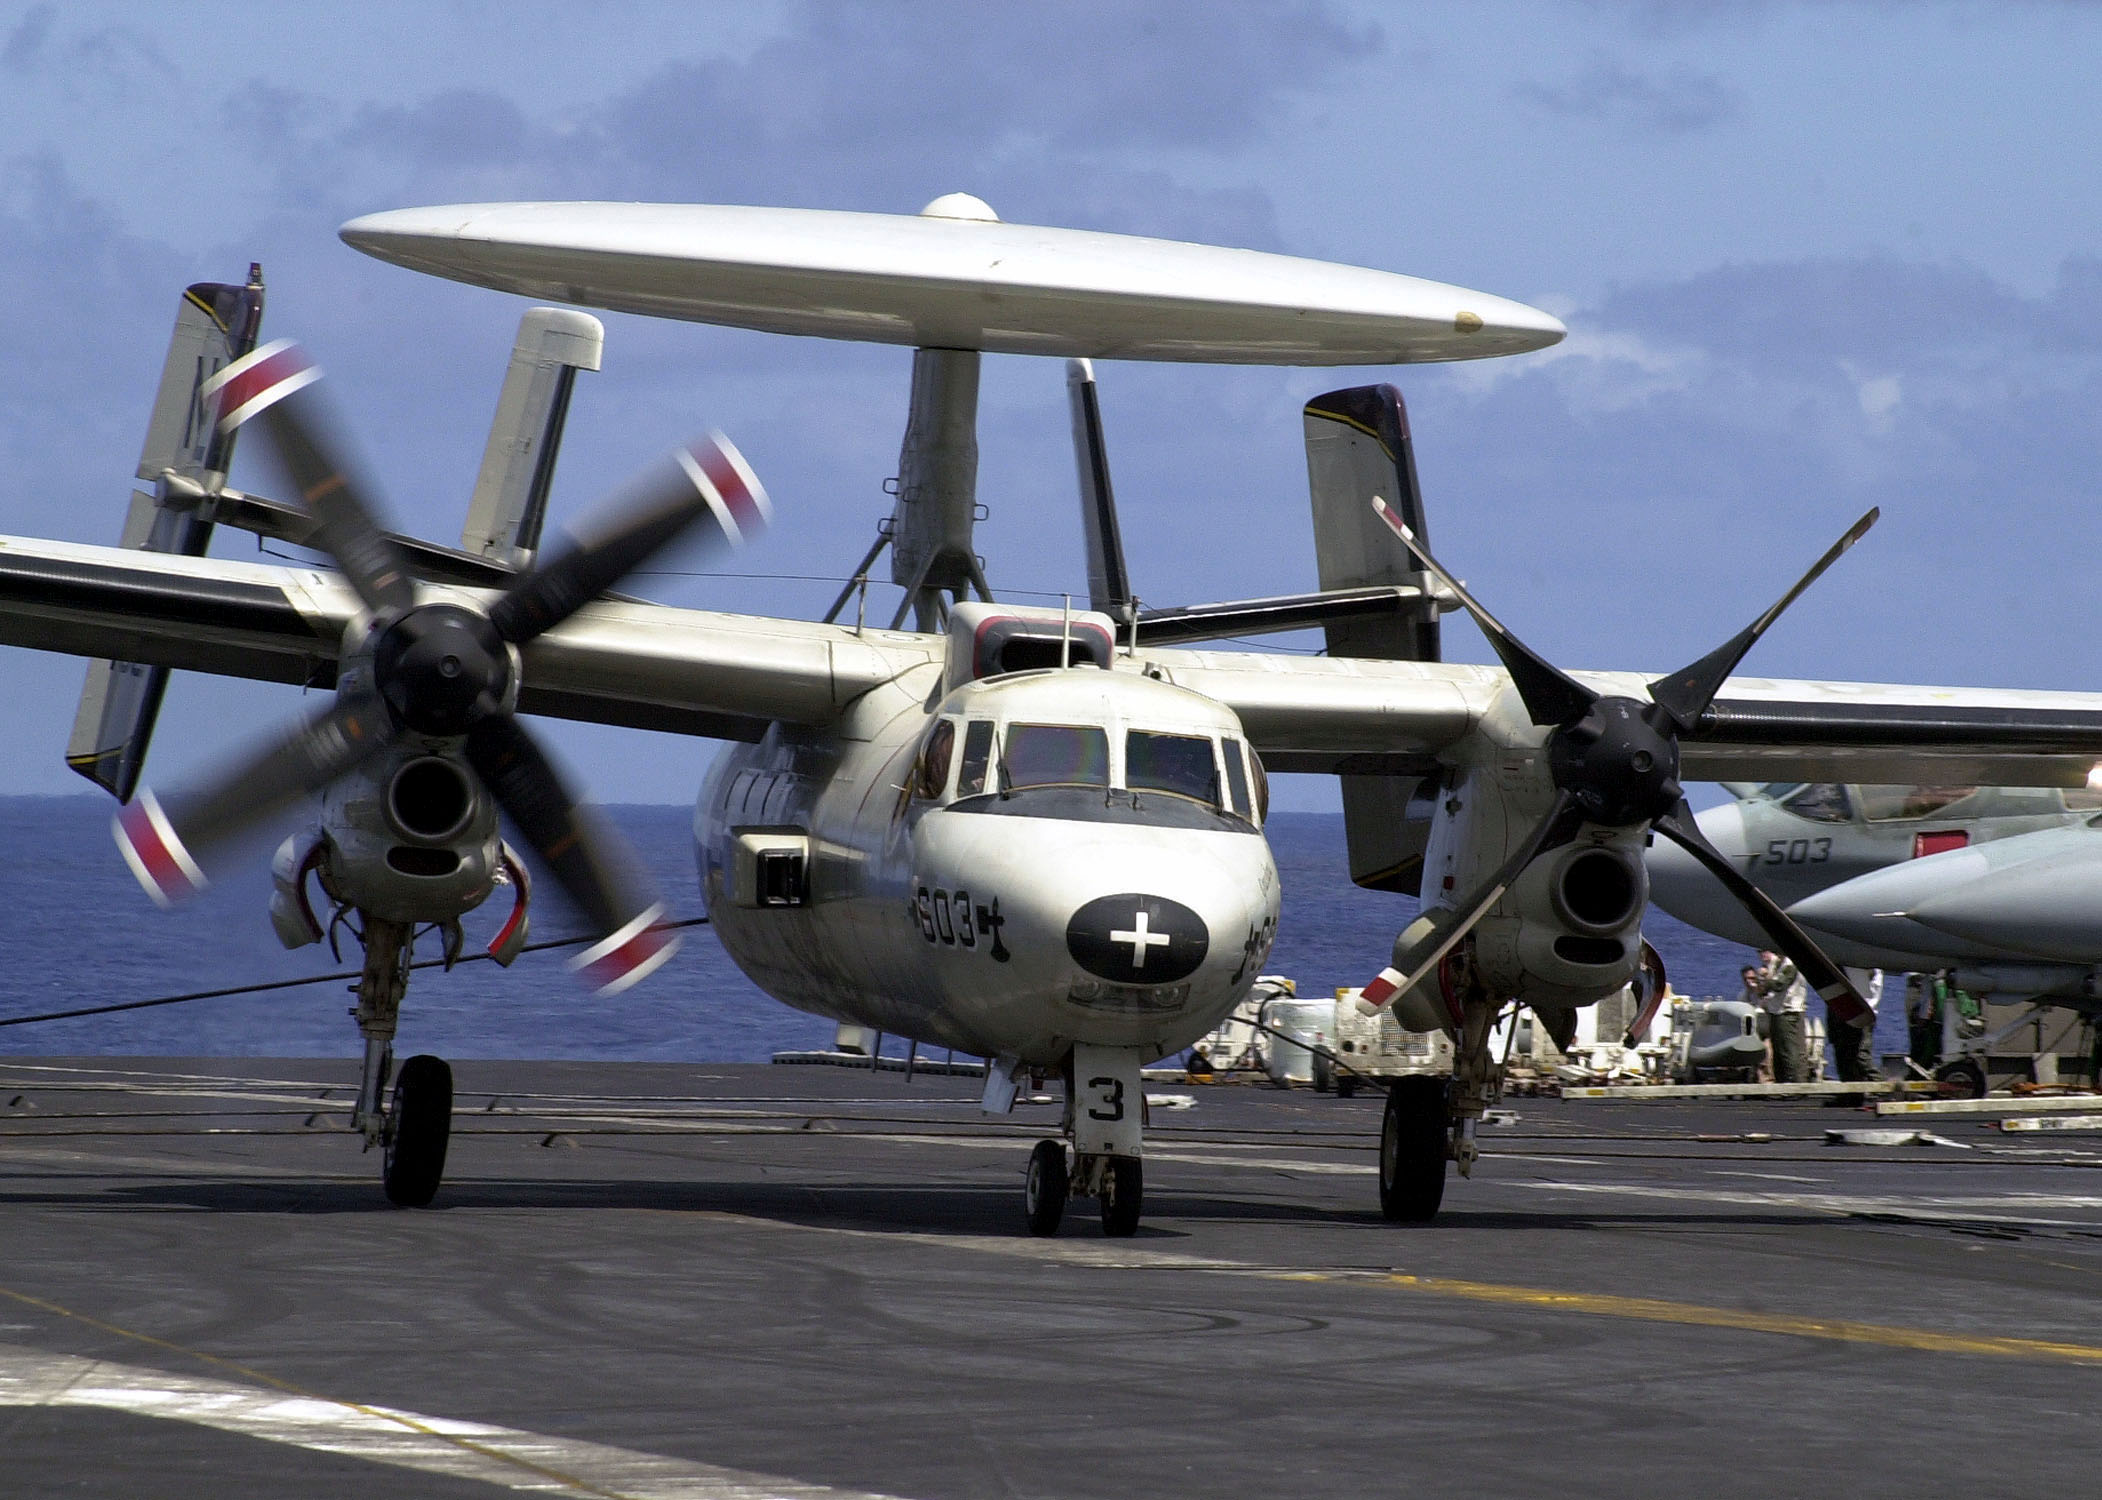 US_Navy_030528-N-0295M-018_An_E-2C_Hawkeye_assigned_to_the_%22Sunkings%22_of_Carrier_Airborne_Early_Warning_Squadron_One_One_Six_%28VAW-116%29_successfully_lands_aboard_the_aircraft_carrier_USS_Constellation_%28CV_64%29_with_o.jpg